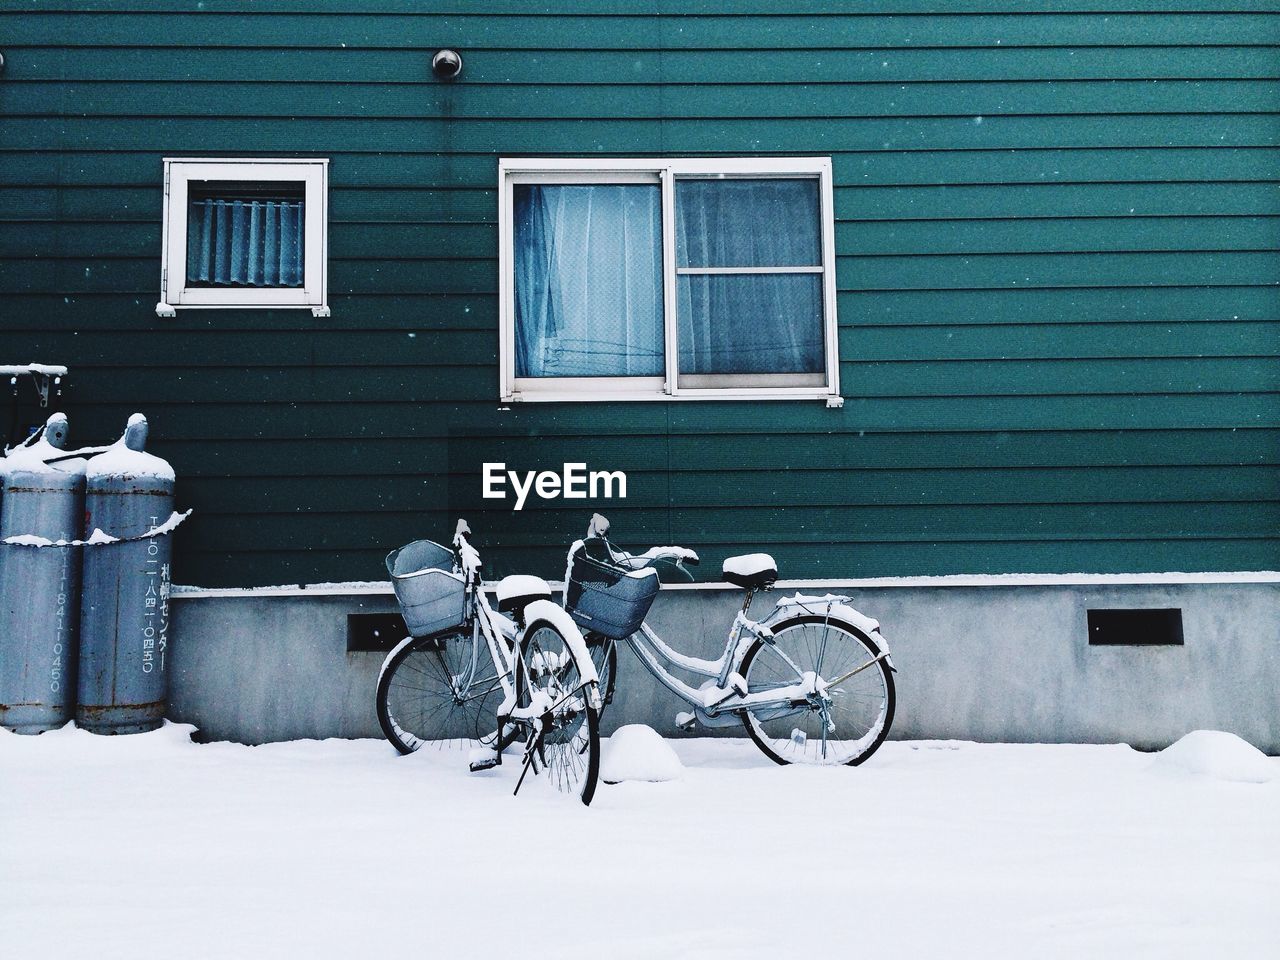 Bicycles parked by house in snow